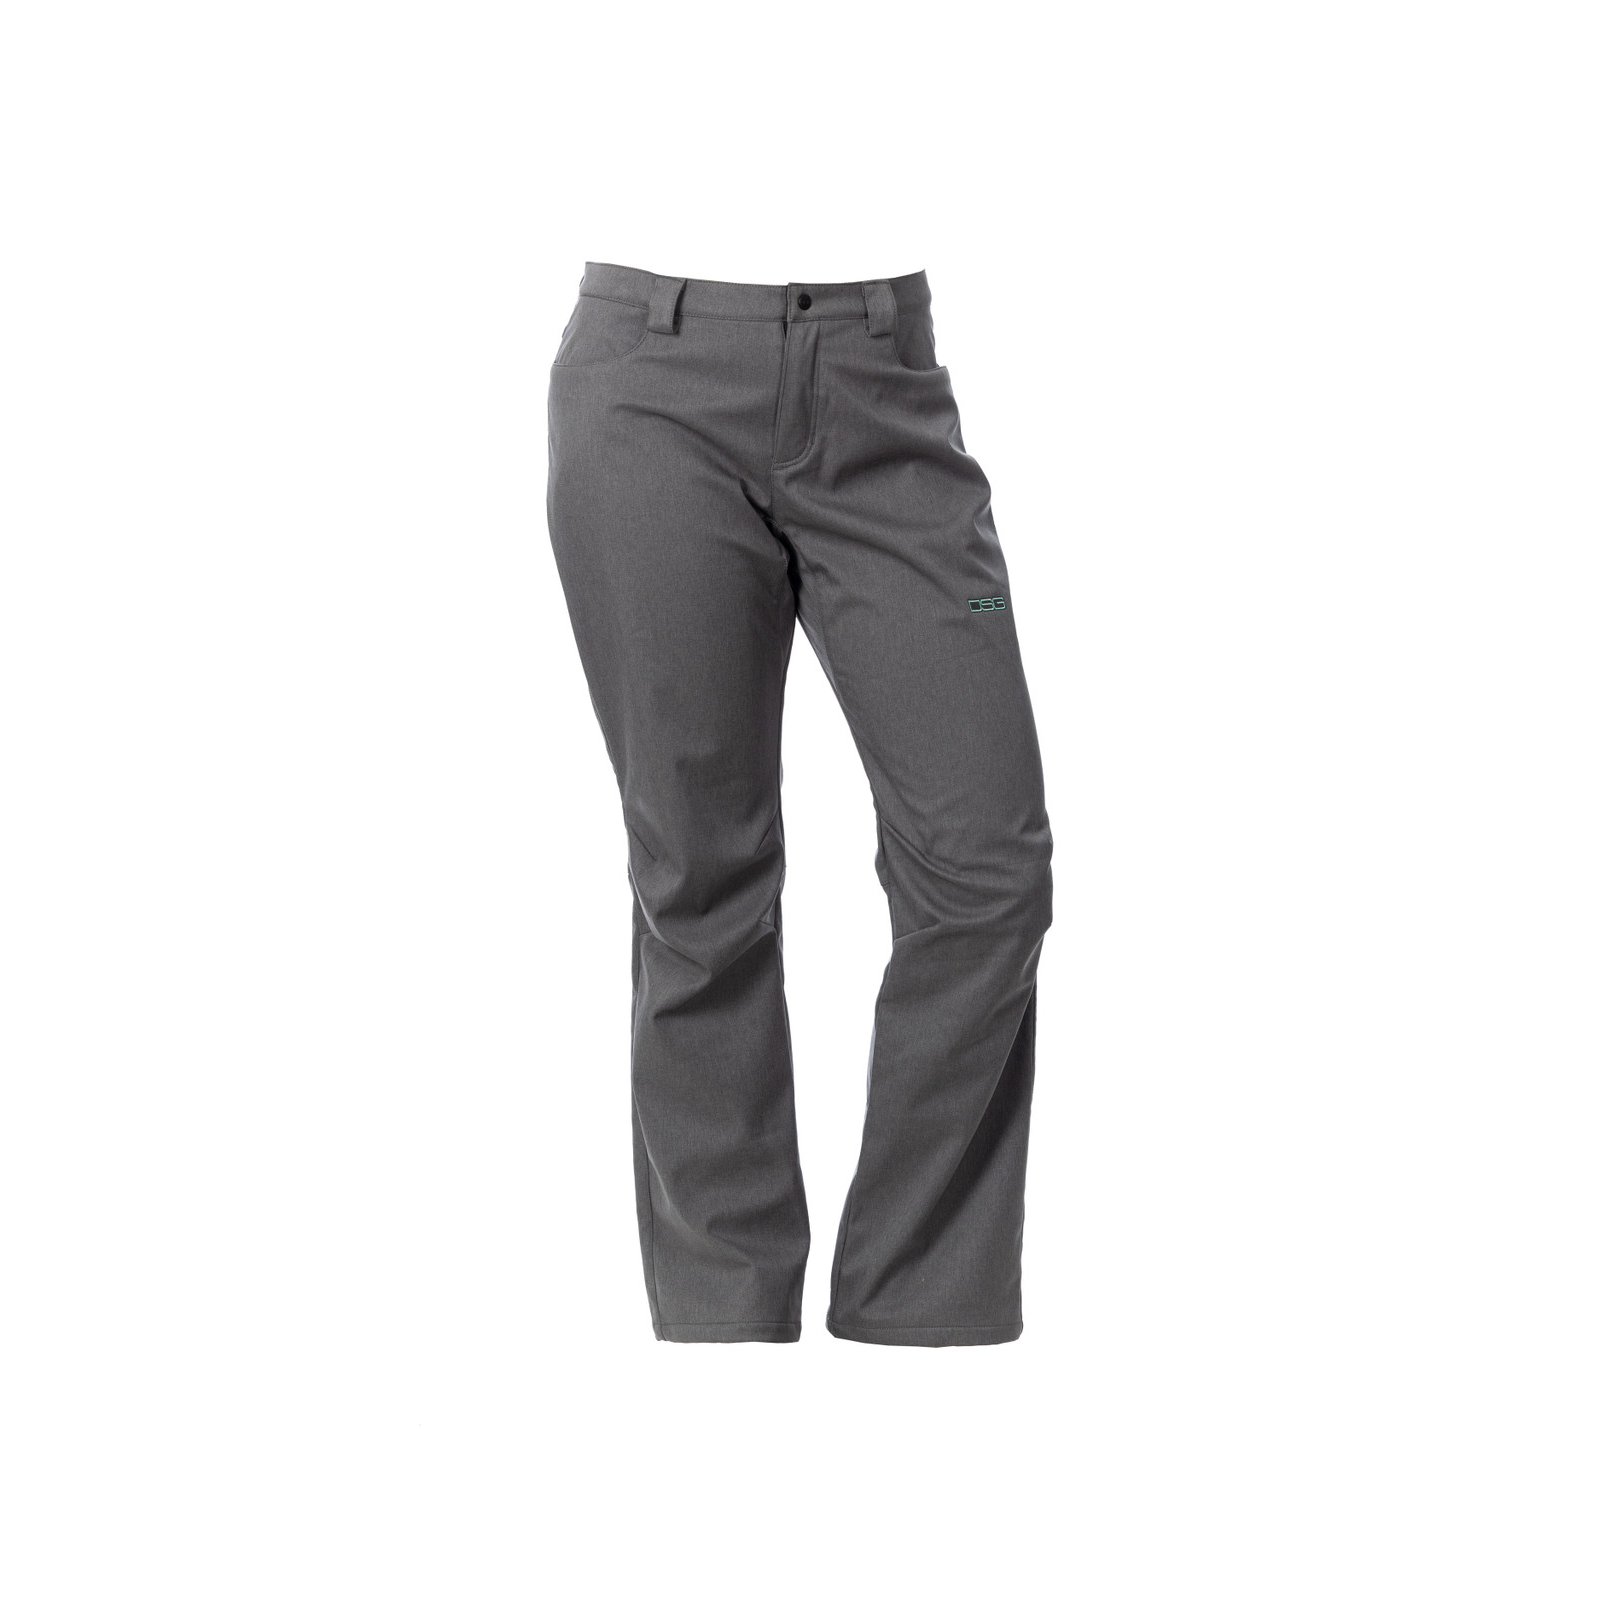 https://static.upnorthsports.com/Image/catimages/CW-Pant-Slate-Front__82763-1600.png